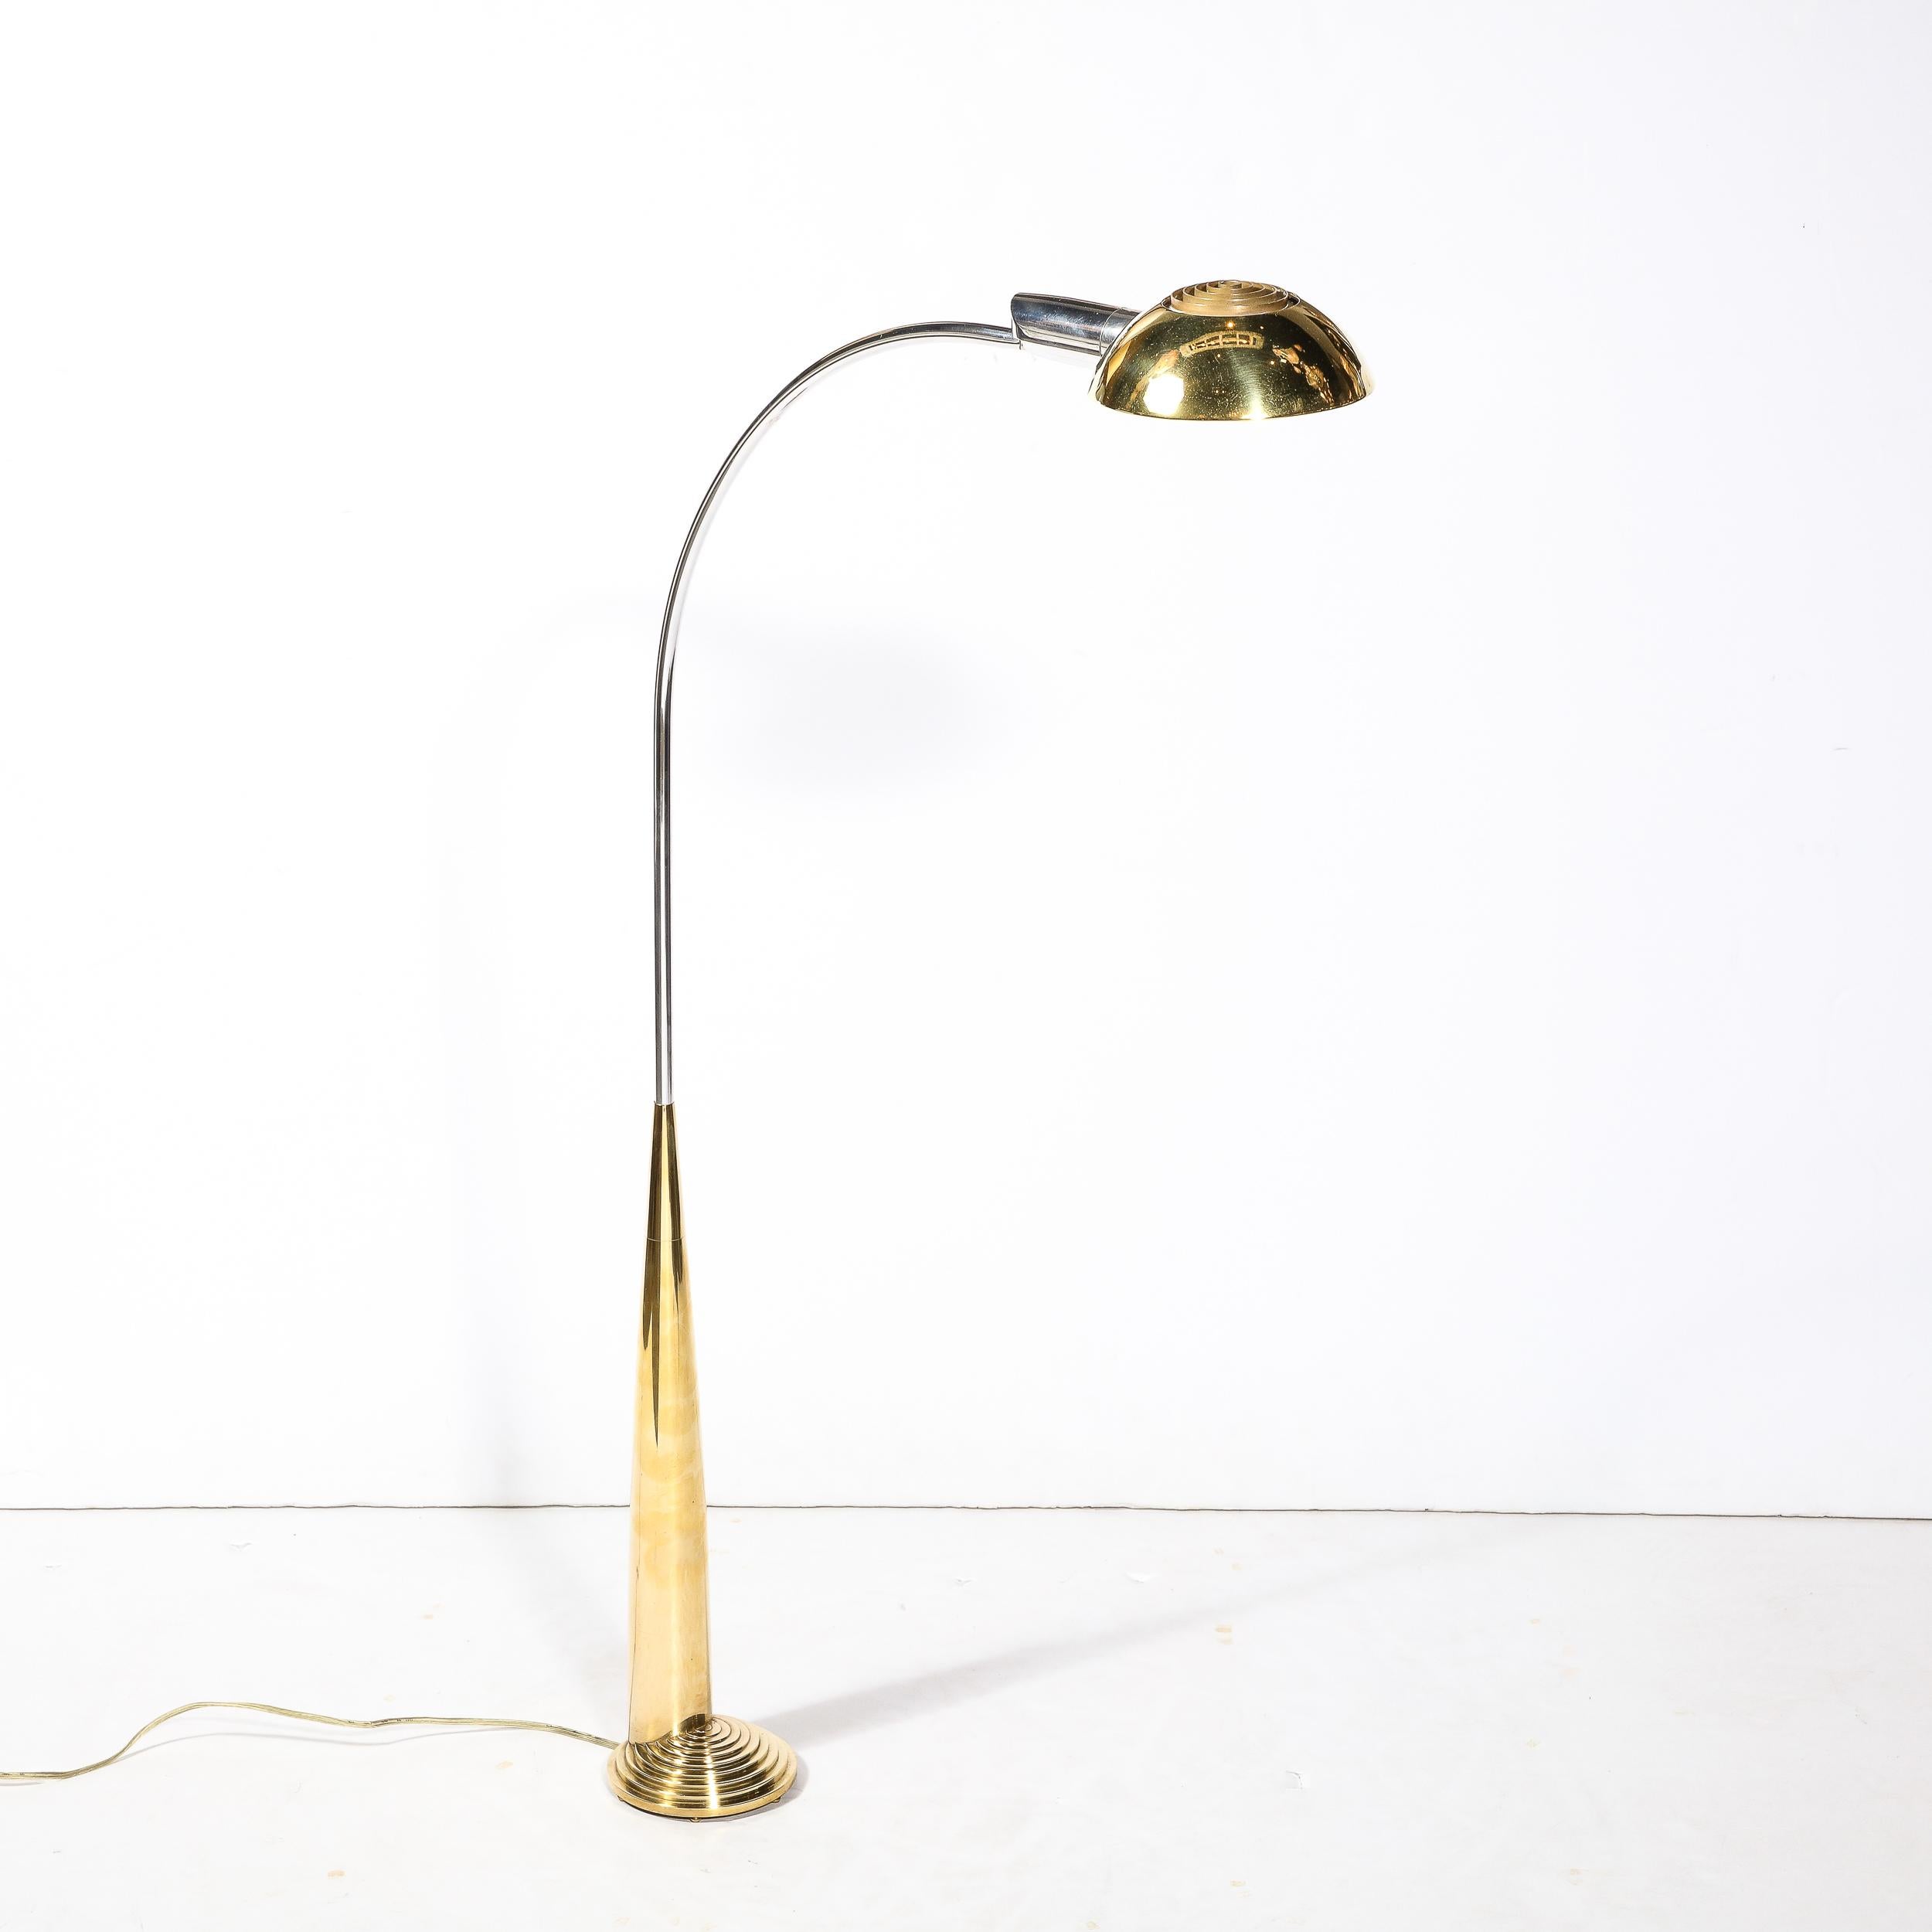 Late 20th Century Mid-Century Modernist Floor Lamp in Chrome & Polished Brass by Cedric Hartman